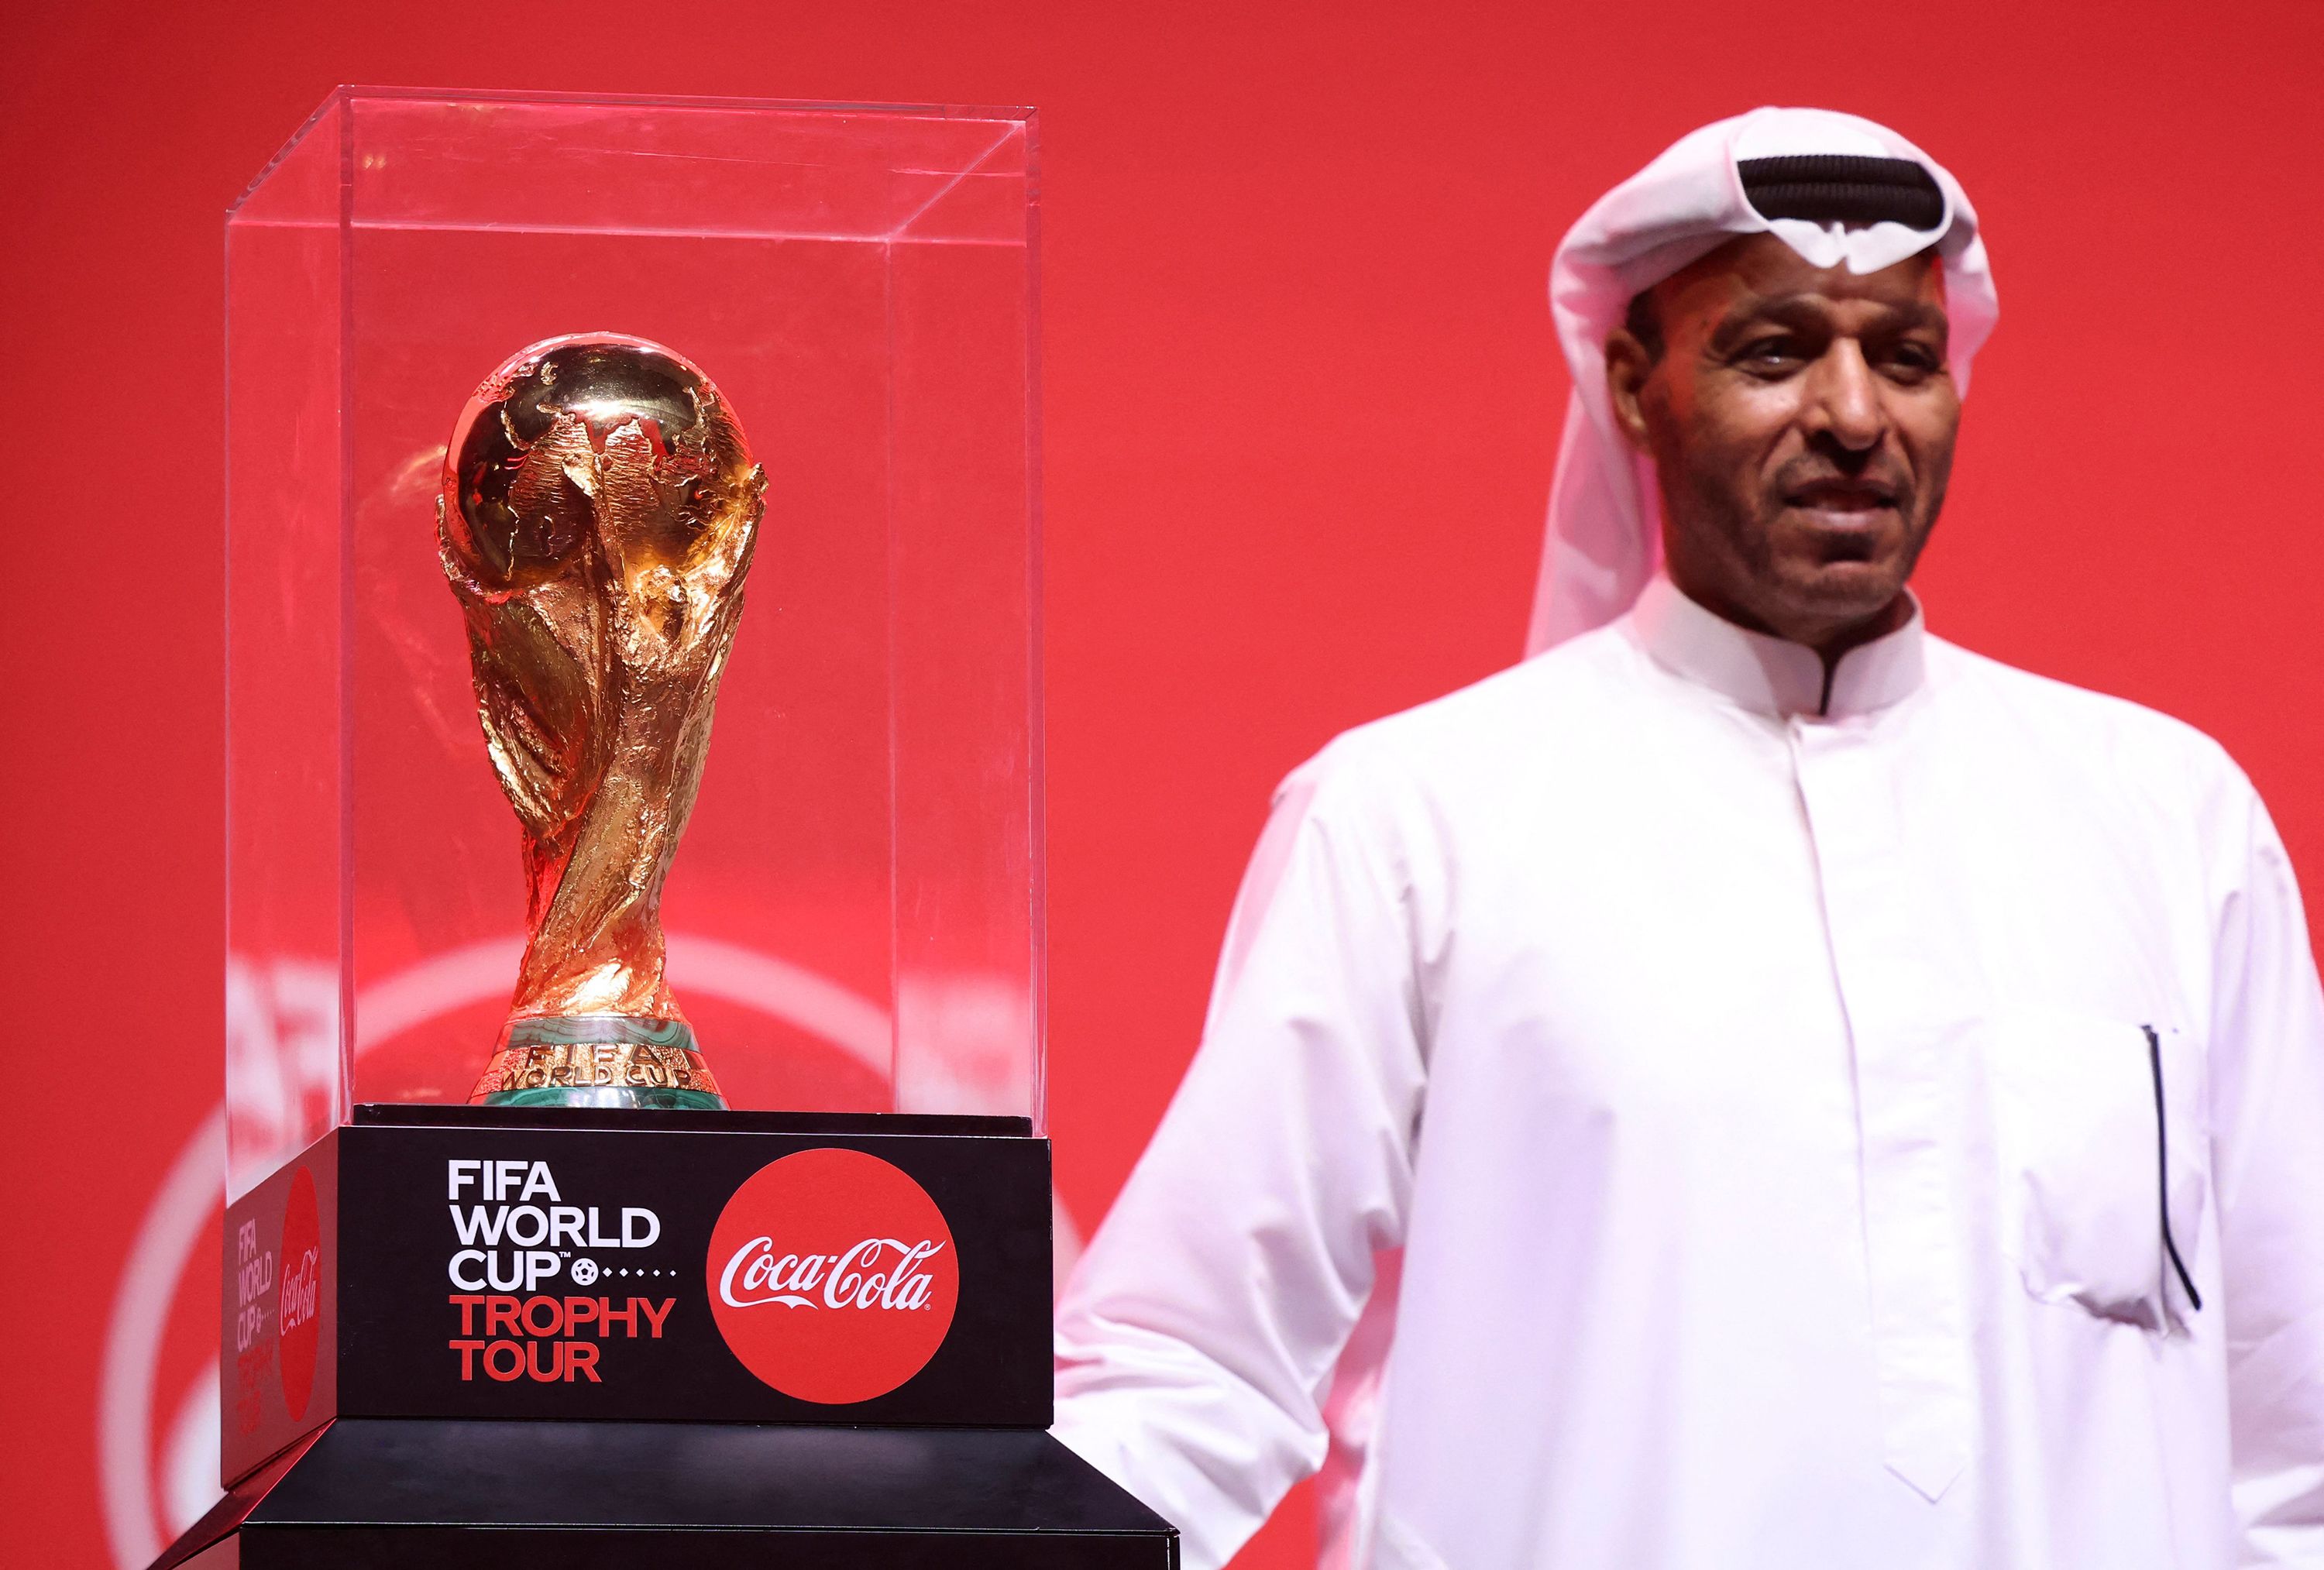 World Cup awards: the Guardian team at Qatar 2022 give their